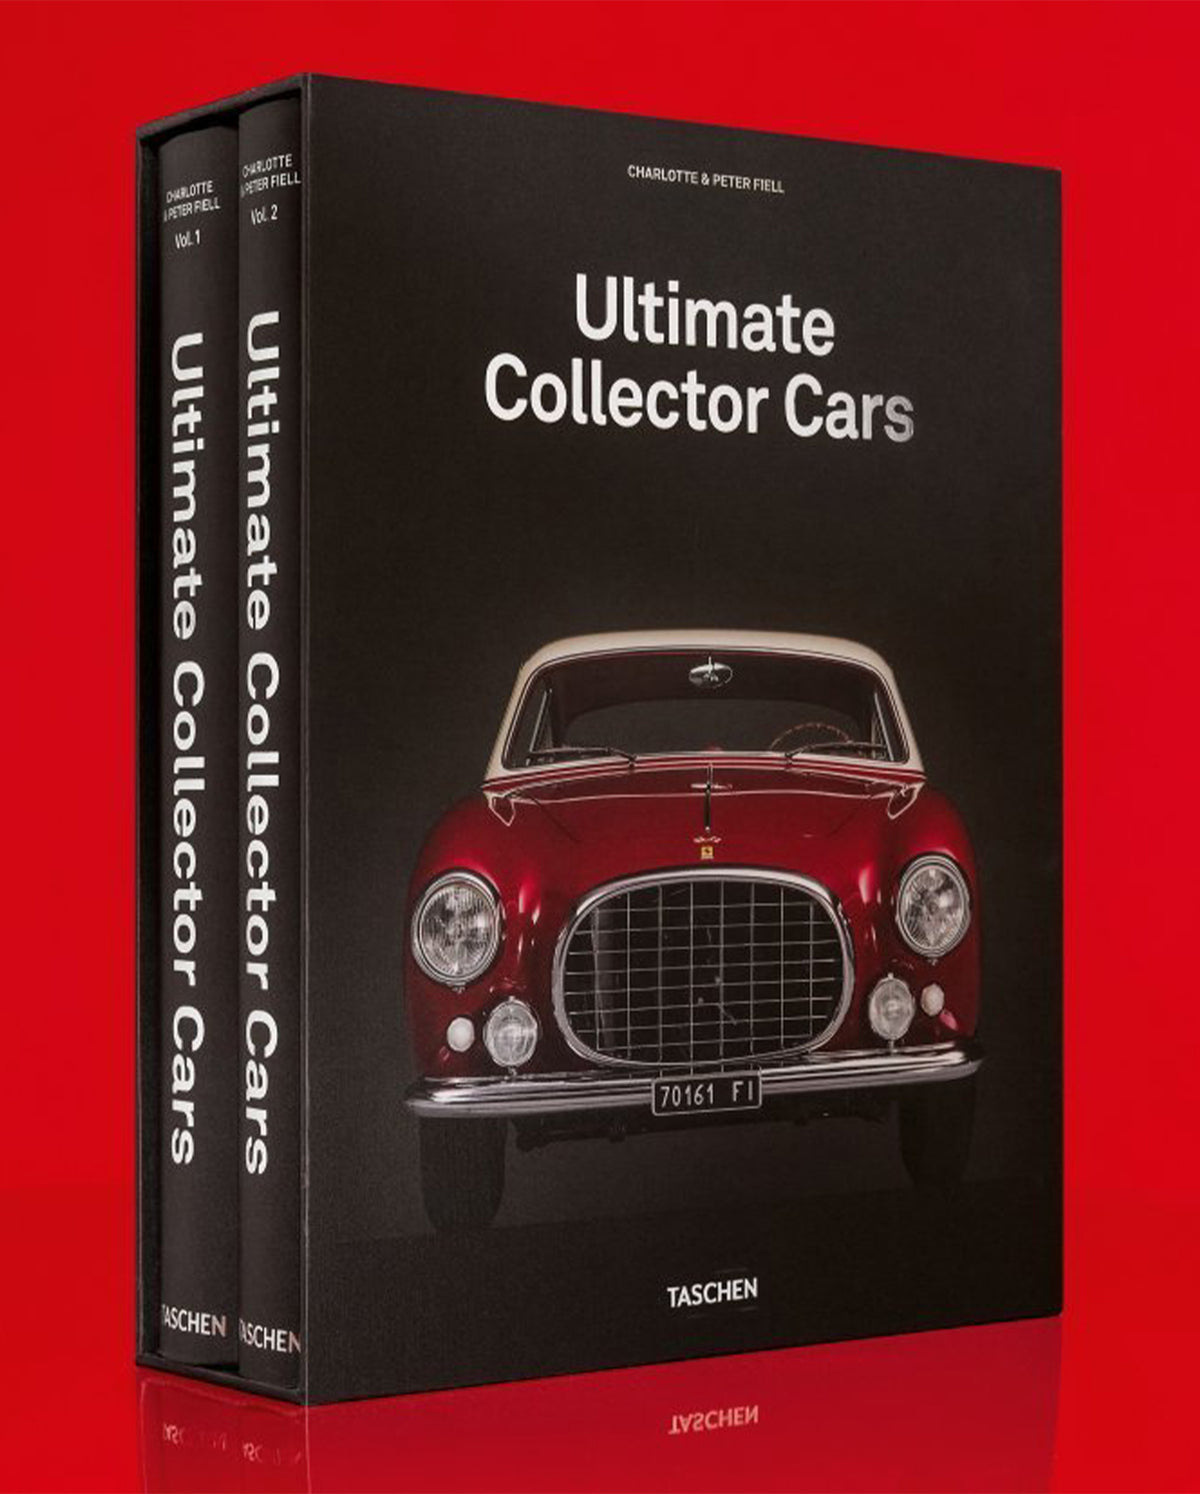 Ultimate Collector Cars